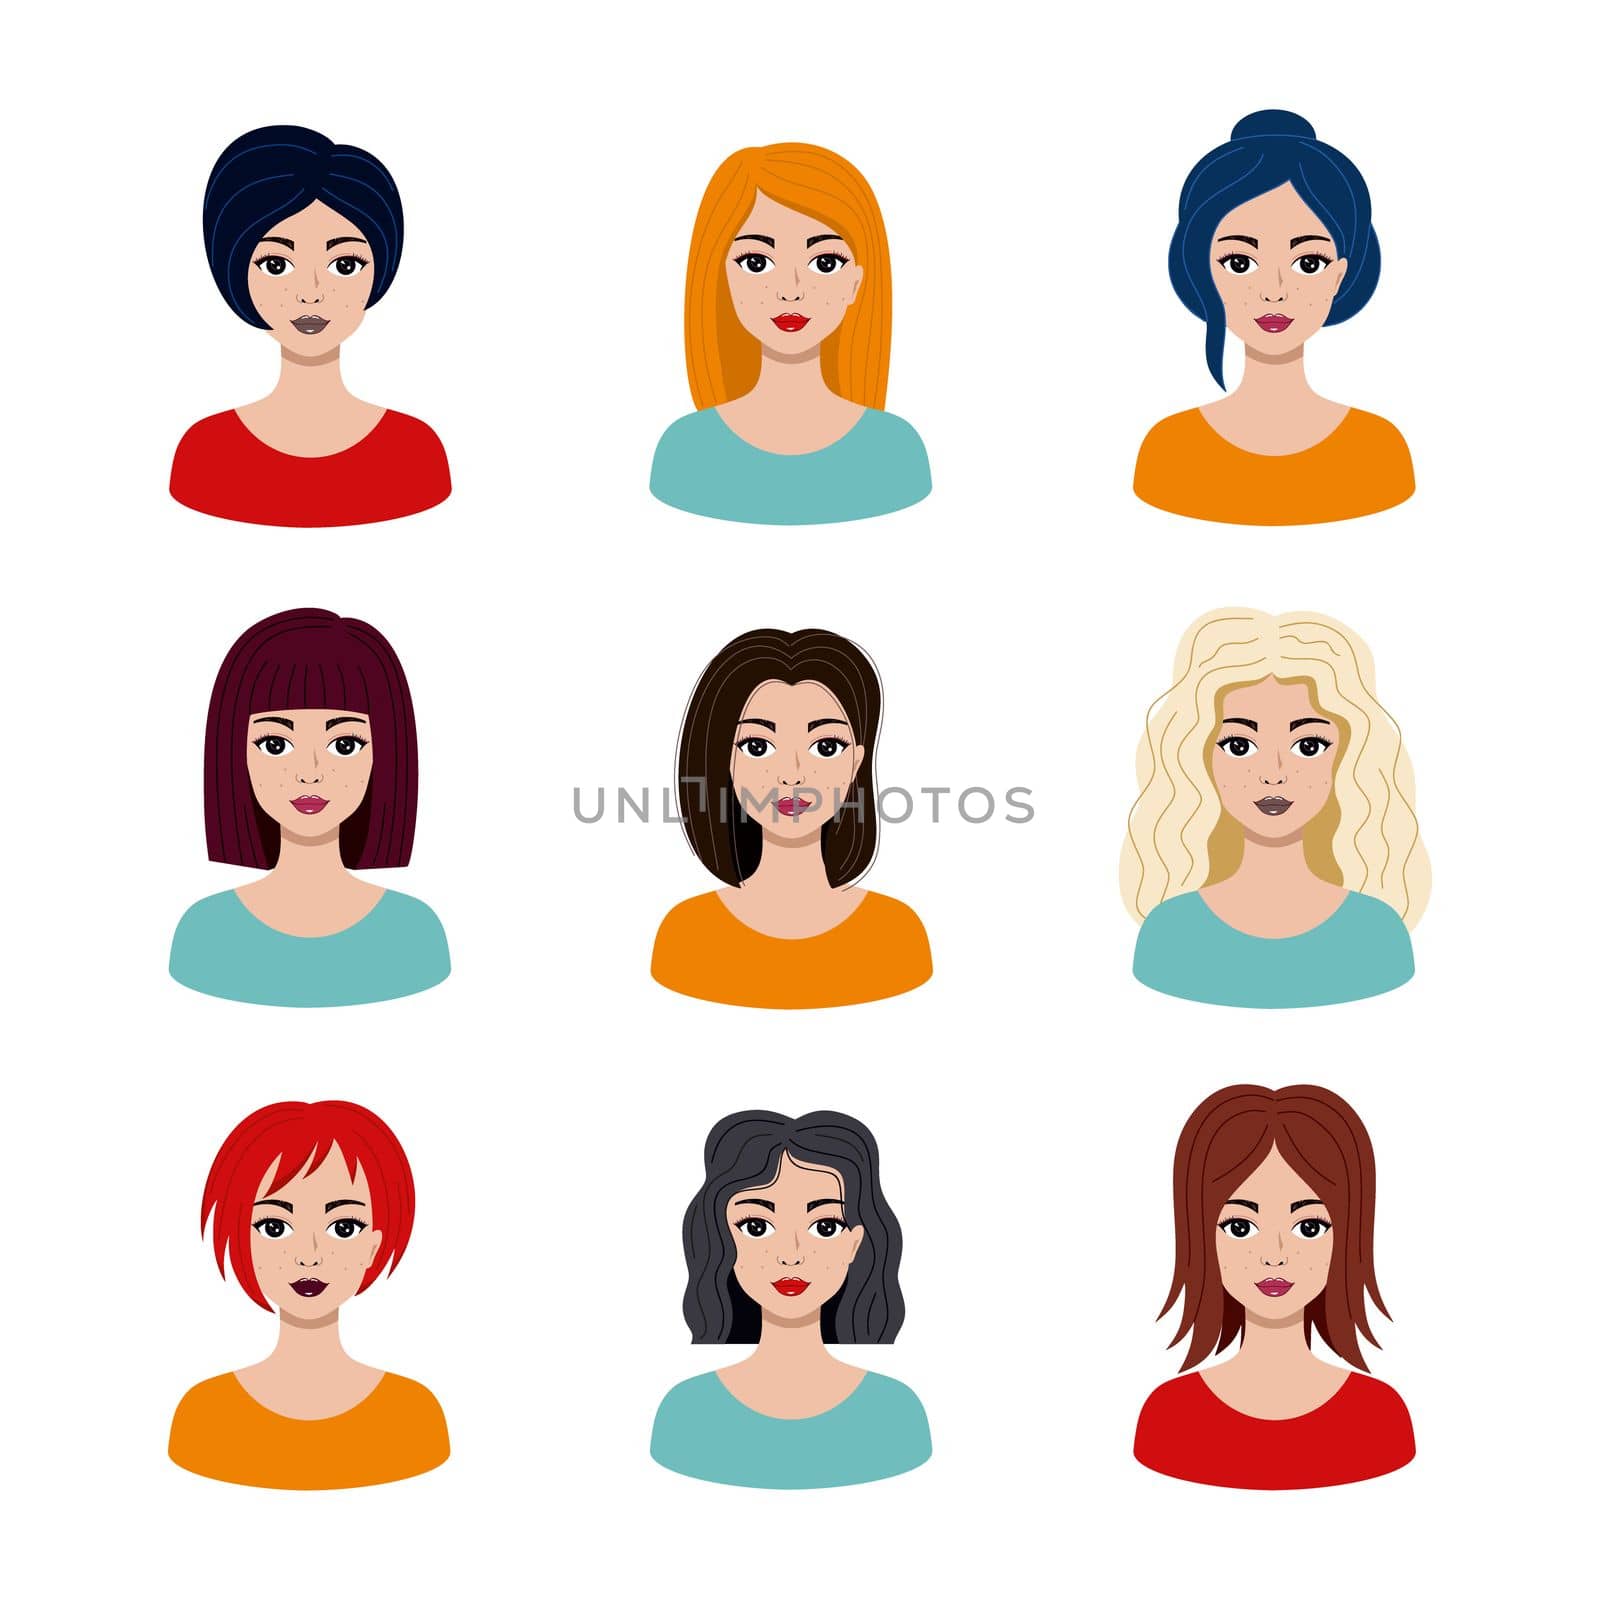 A woman with a fashionable hairstyle. A set of avatars with a girl's face.